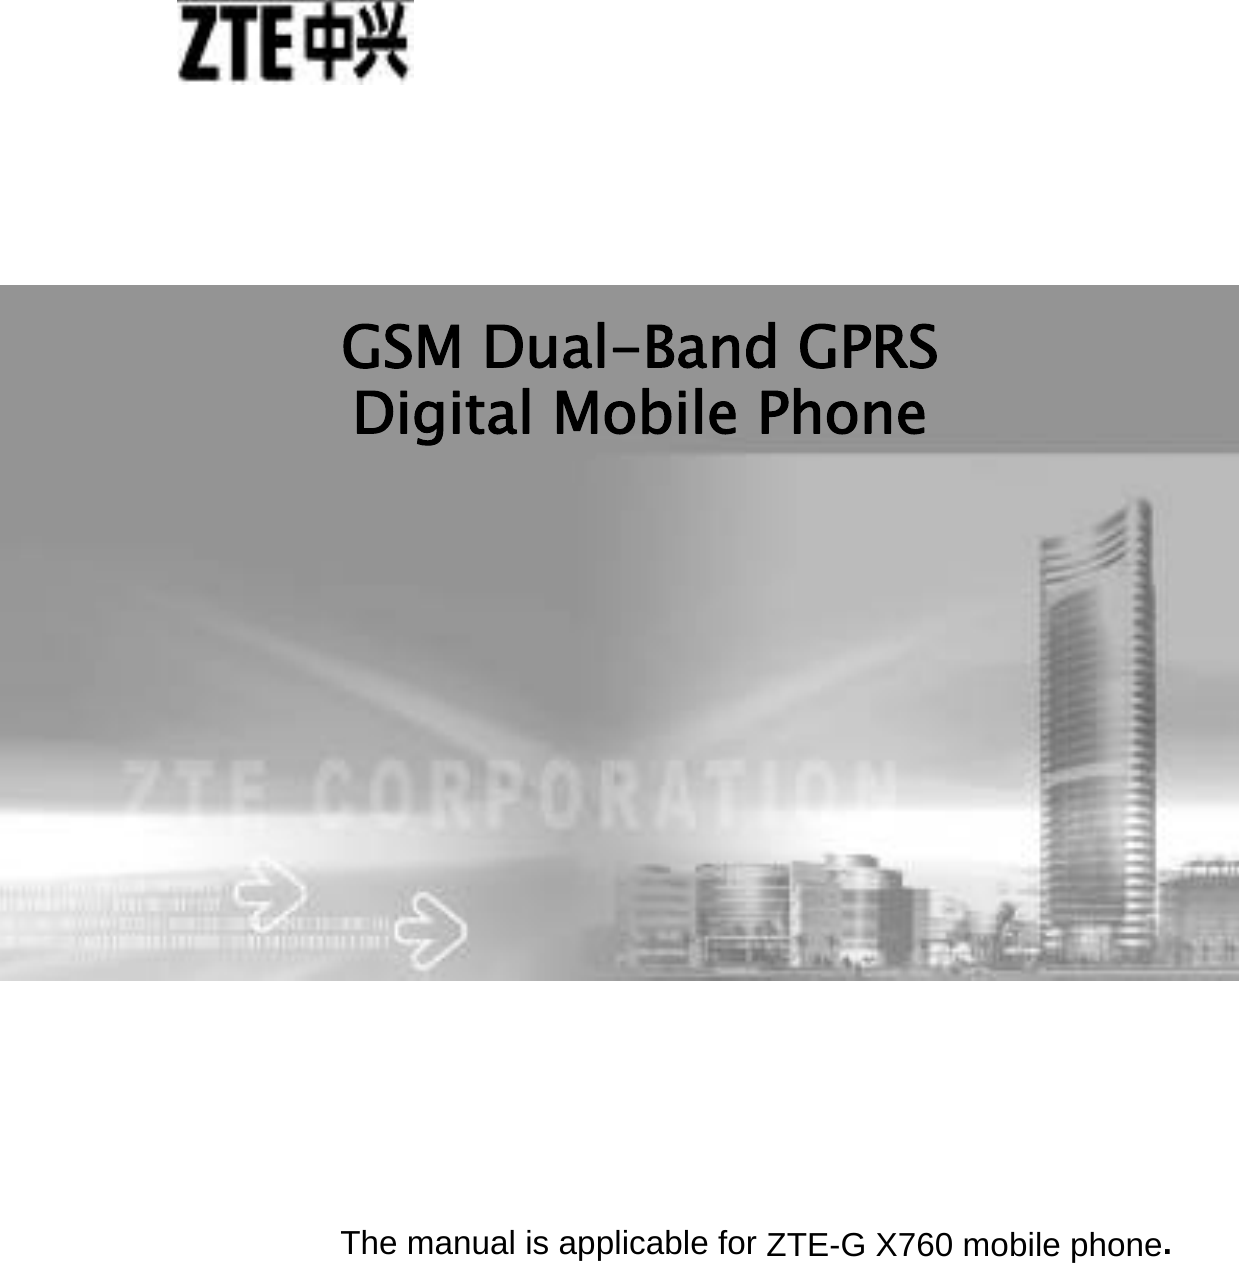          The manual is applicable for ZTE-G X760 mobile phone. GSM Dual-Band GPRS Digital Mobile Phone 